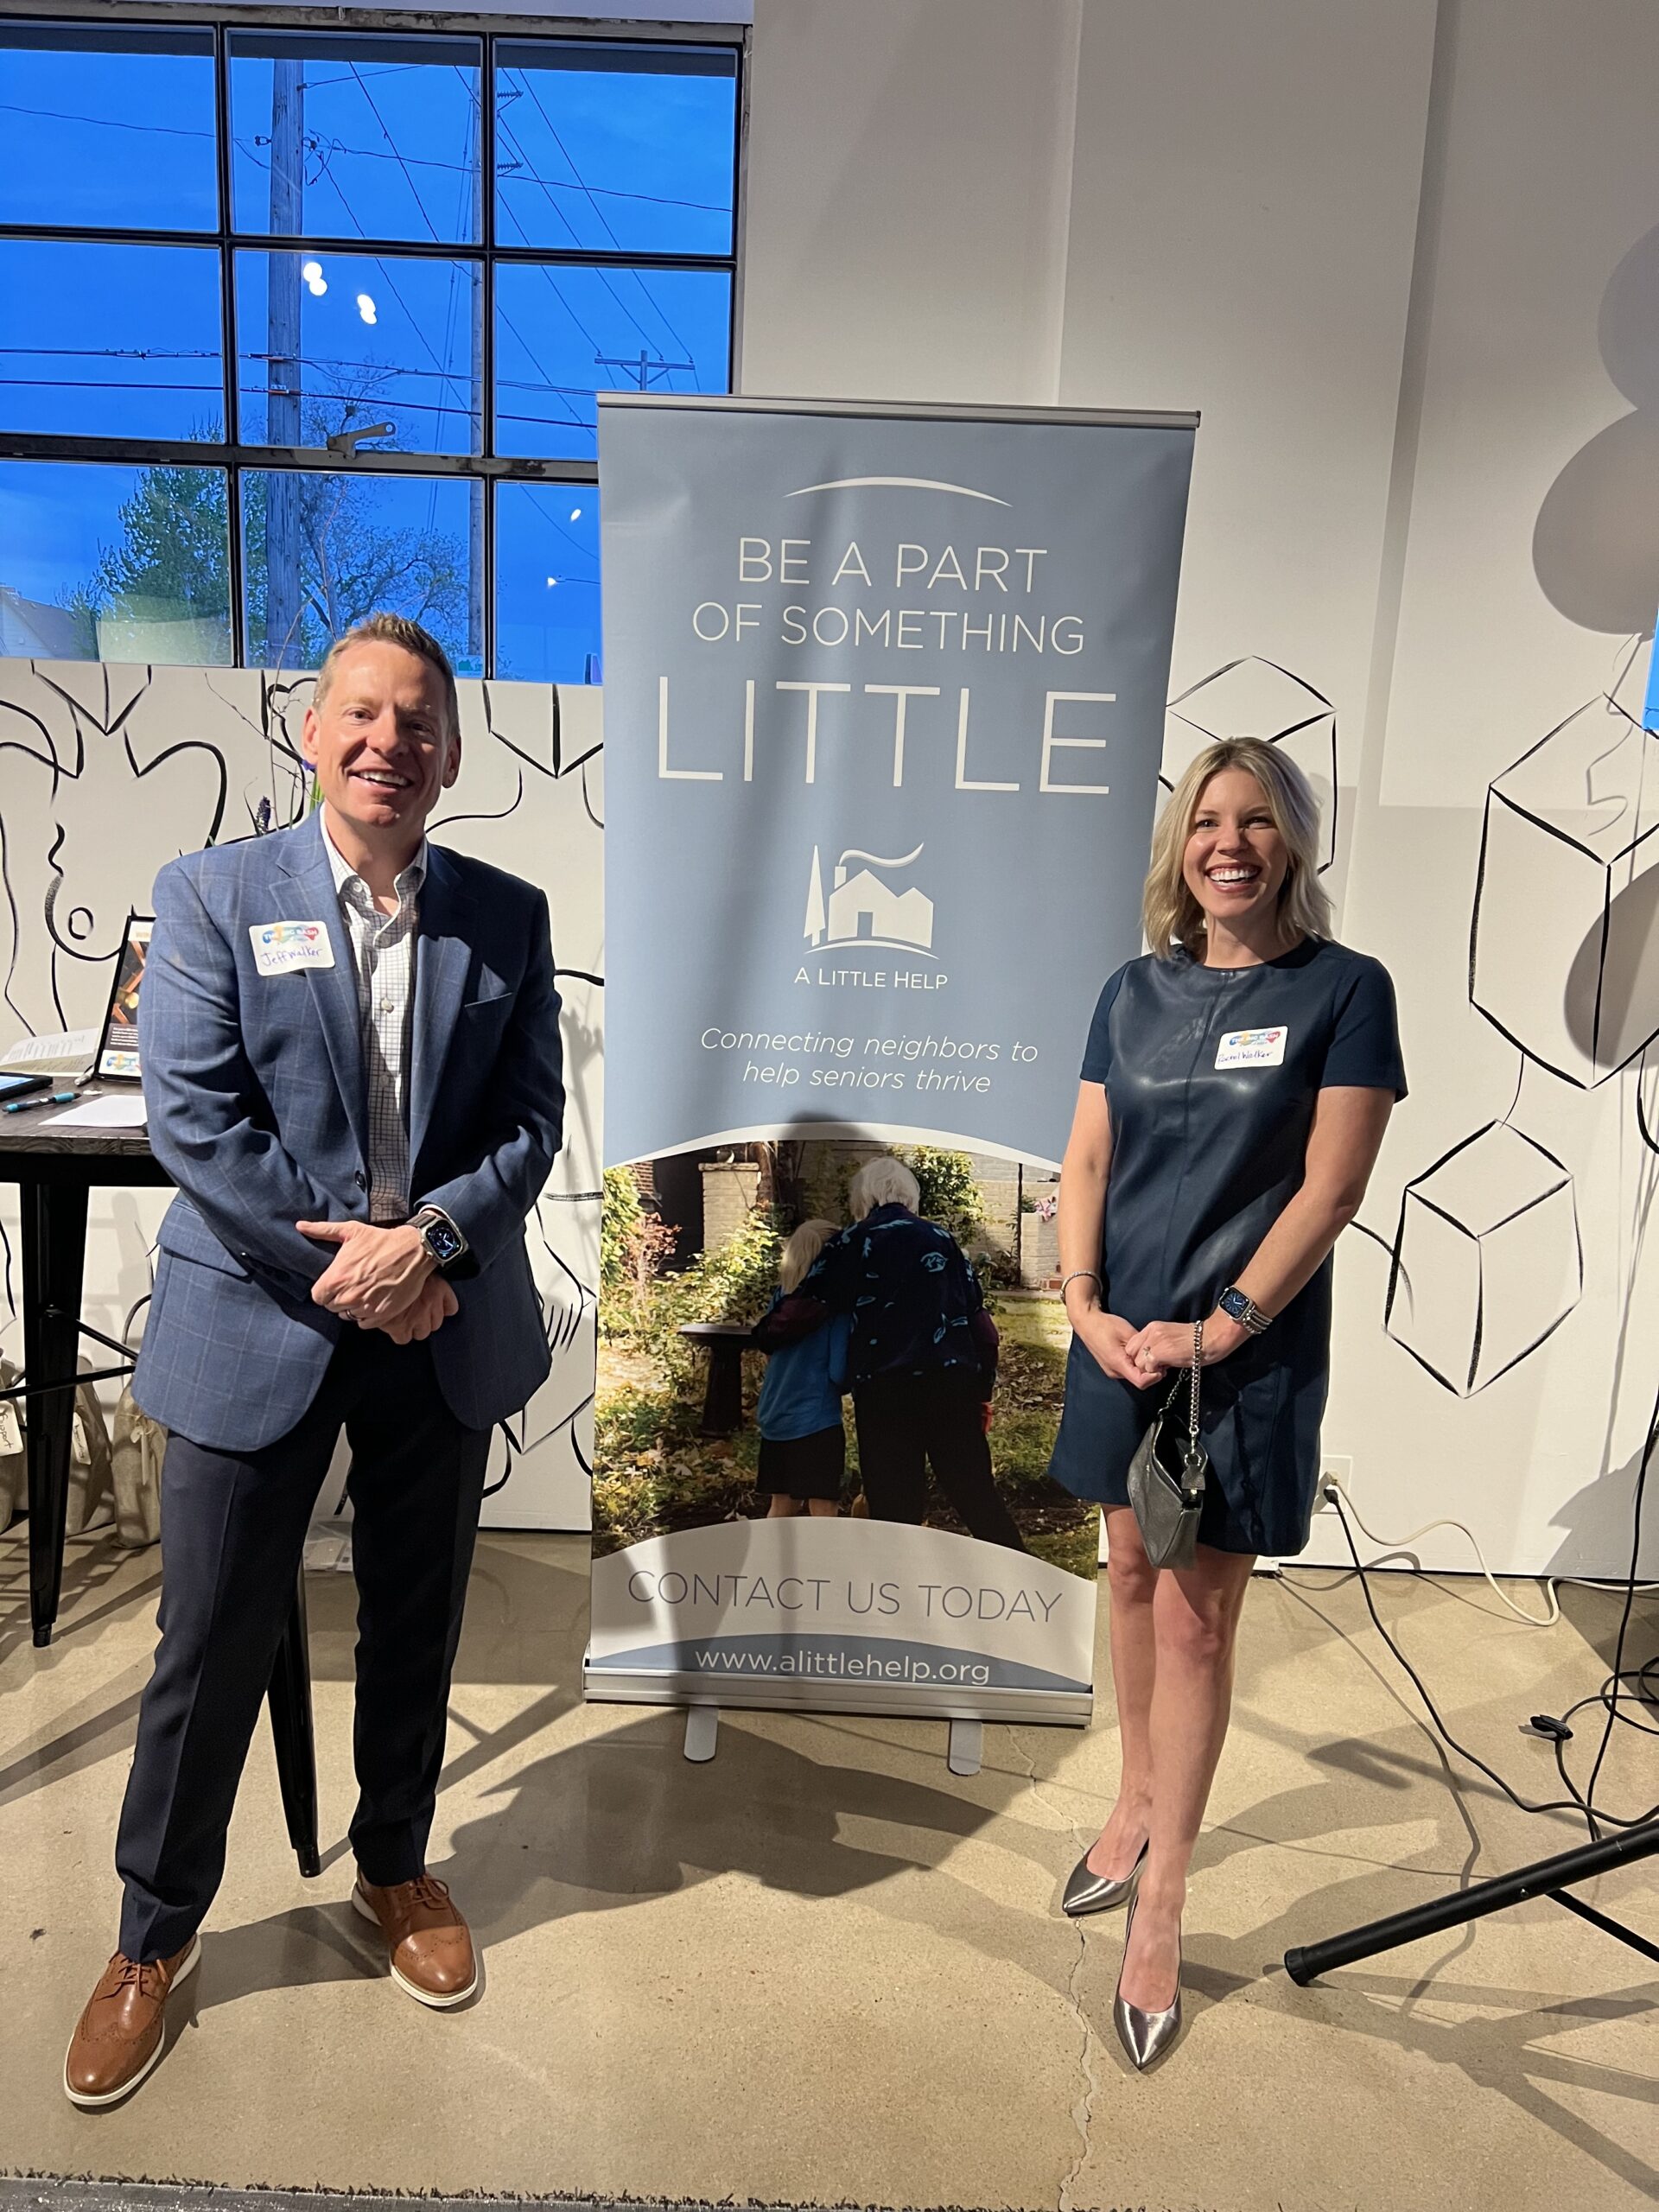 Redstone Bank proudly supports A Little Help. Our team enjoyed The Big Bash celebration and we're excited to participate in more of their events.